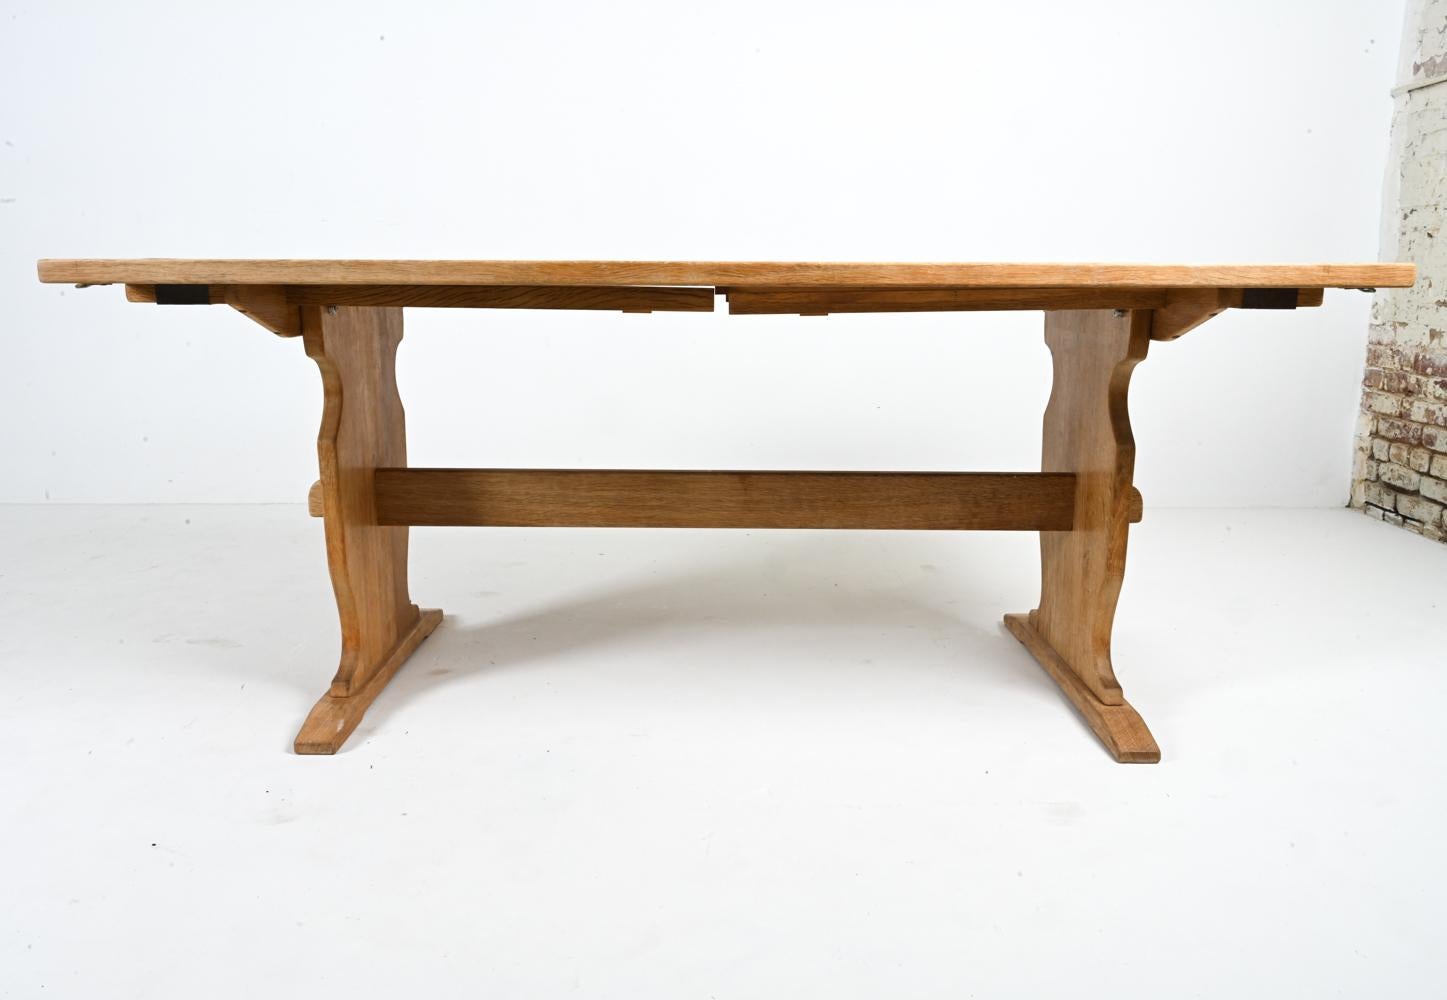 Danish Ox Art Oak & Ceramic Tile Mosaic-Top Dining Table With Leaves, c. 1970's For Sale 8